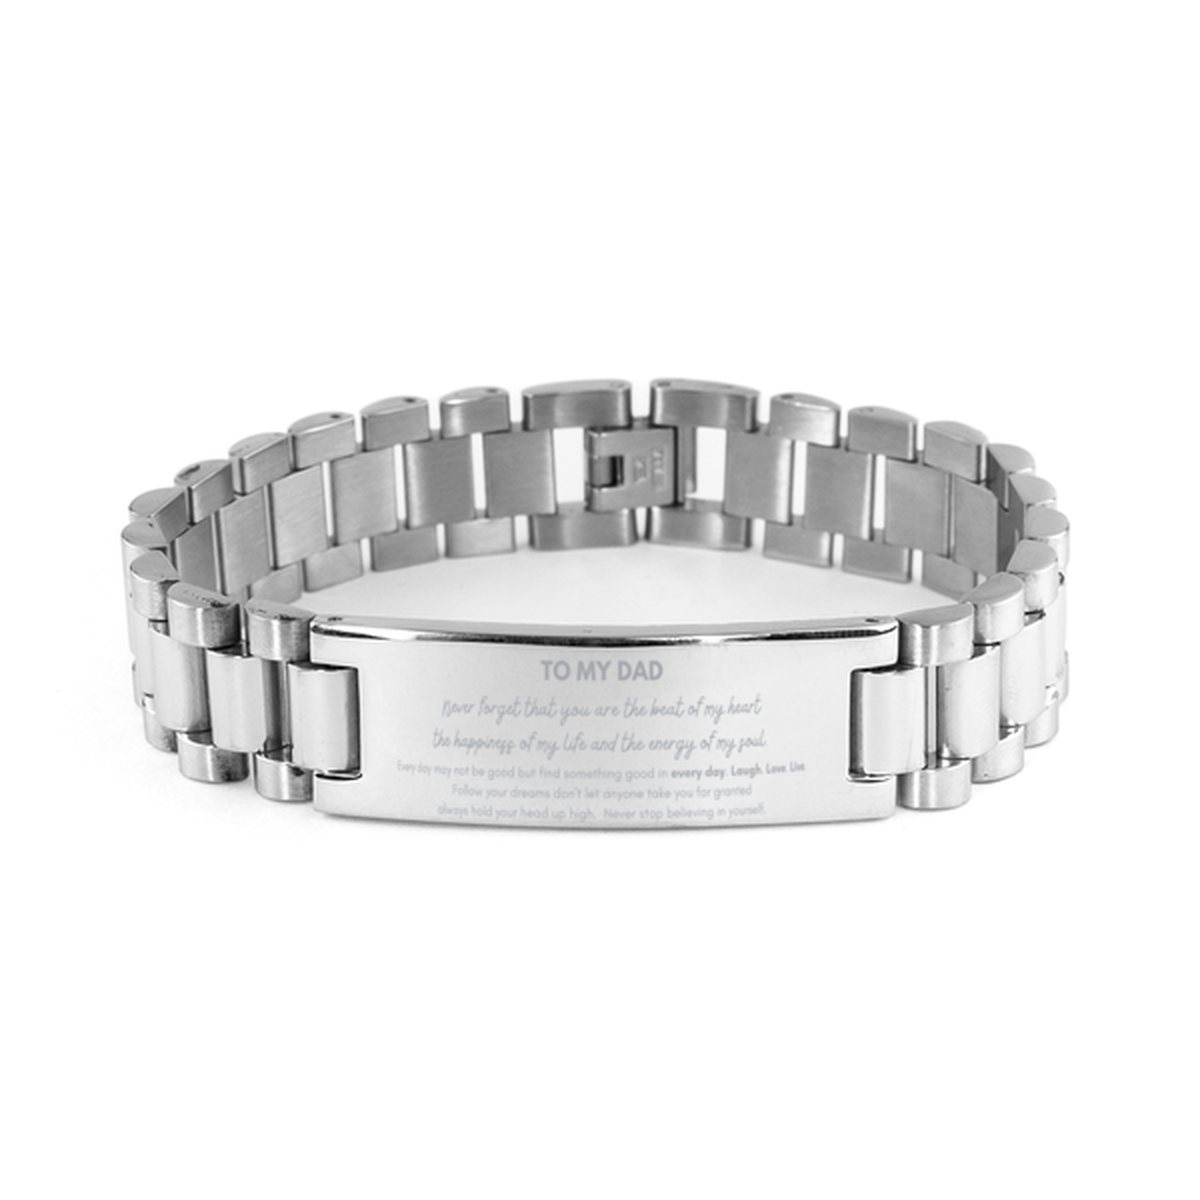 To My Dad Bracelet Gifts, Christmas Dad Ladder Stainless Steel Bracelet Present, Birthday Unique Motivational For Dad, To My Dad Never forget that you are the beat of my heart the happiness of my life and the energy of my soul